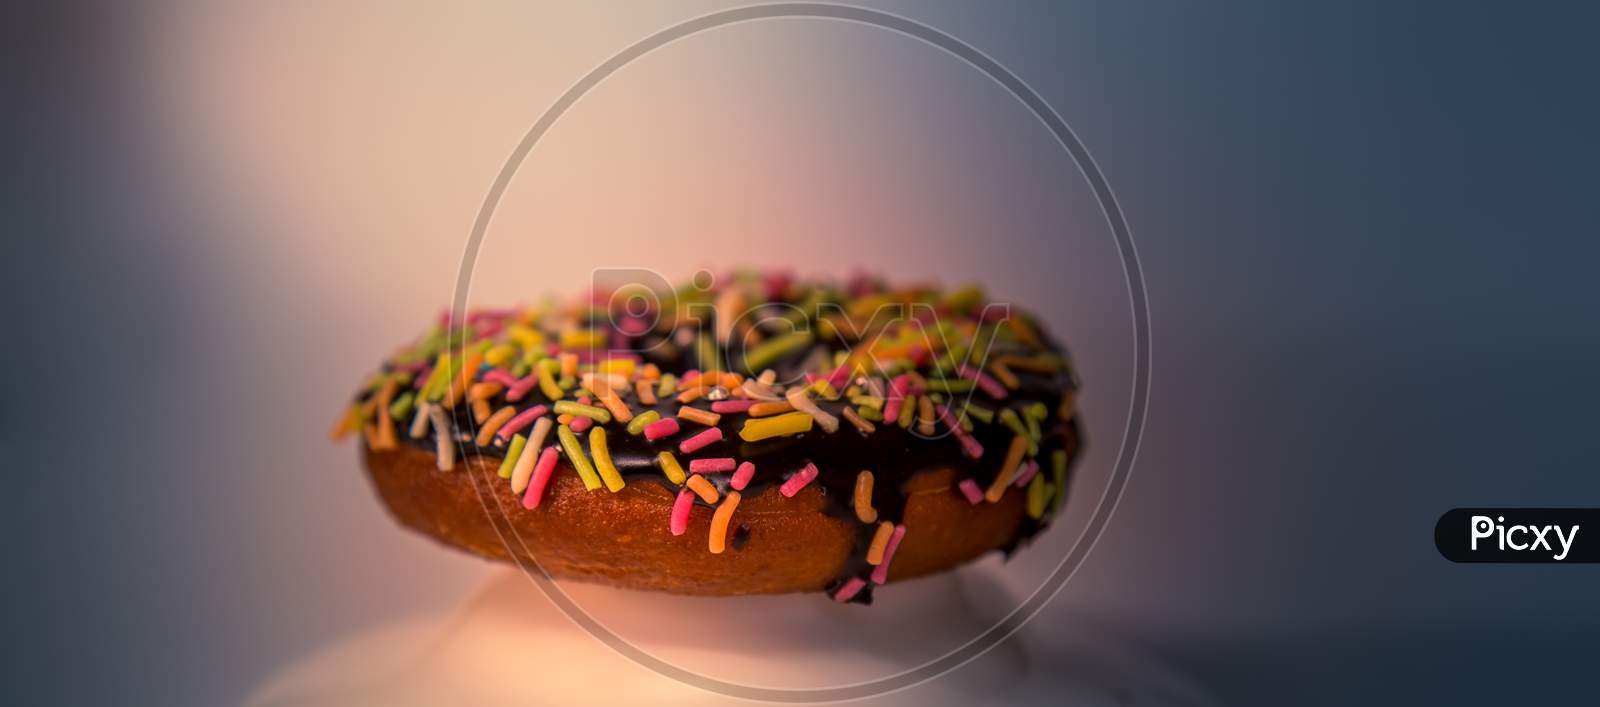 Assorted Donuts With Dark Chocolate Frosted And Sprinkles On It